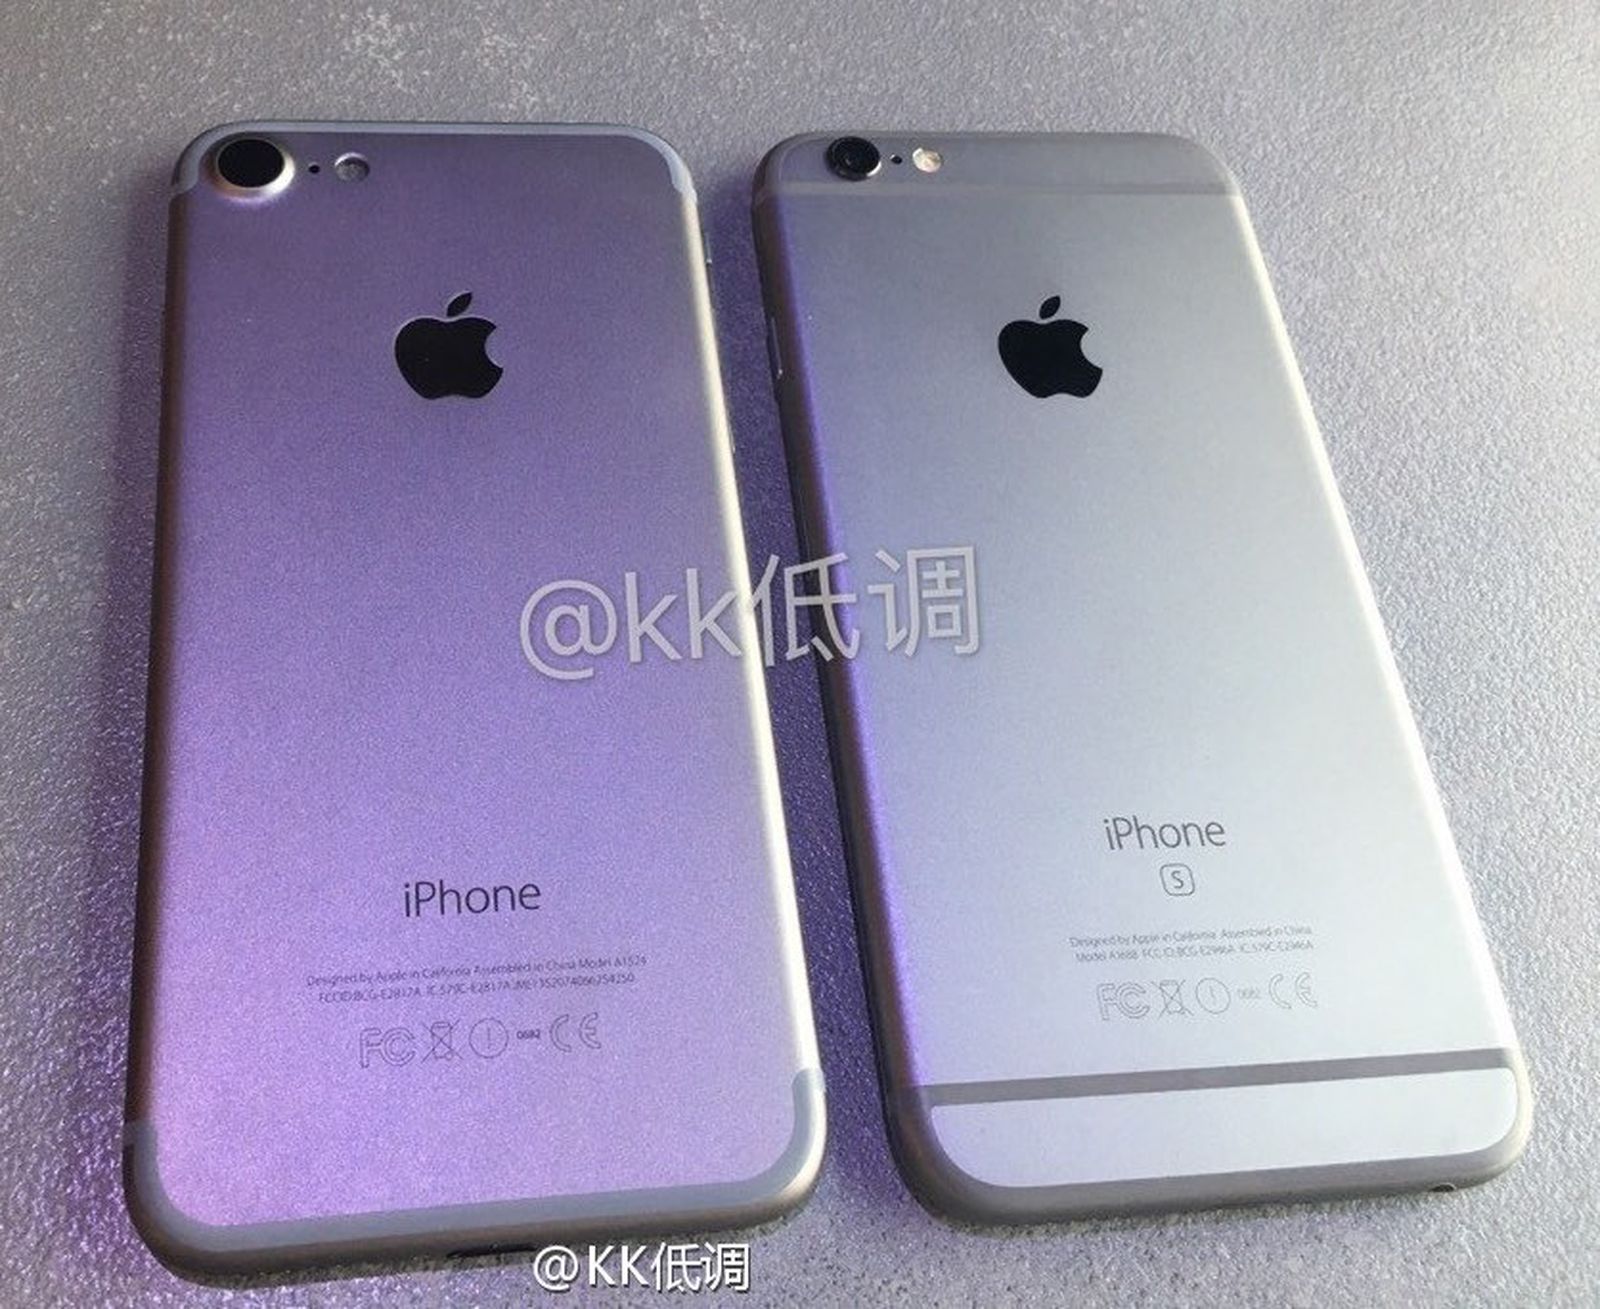 New Iphone 7 Video Offers Side By Side Comparison With Iphone 6s Macrumors